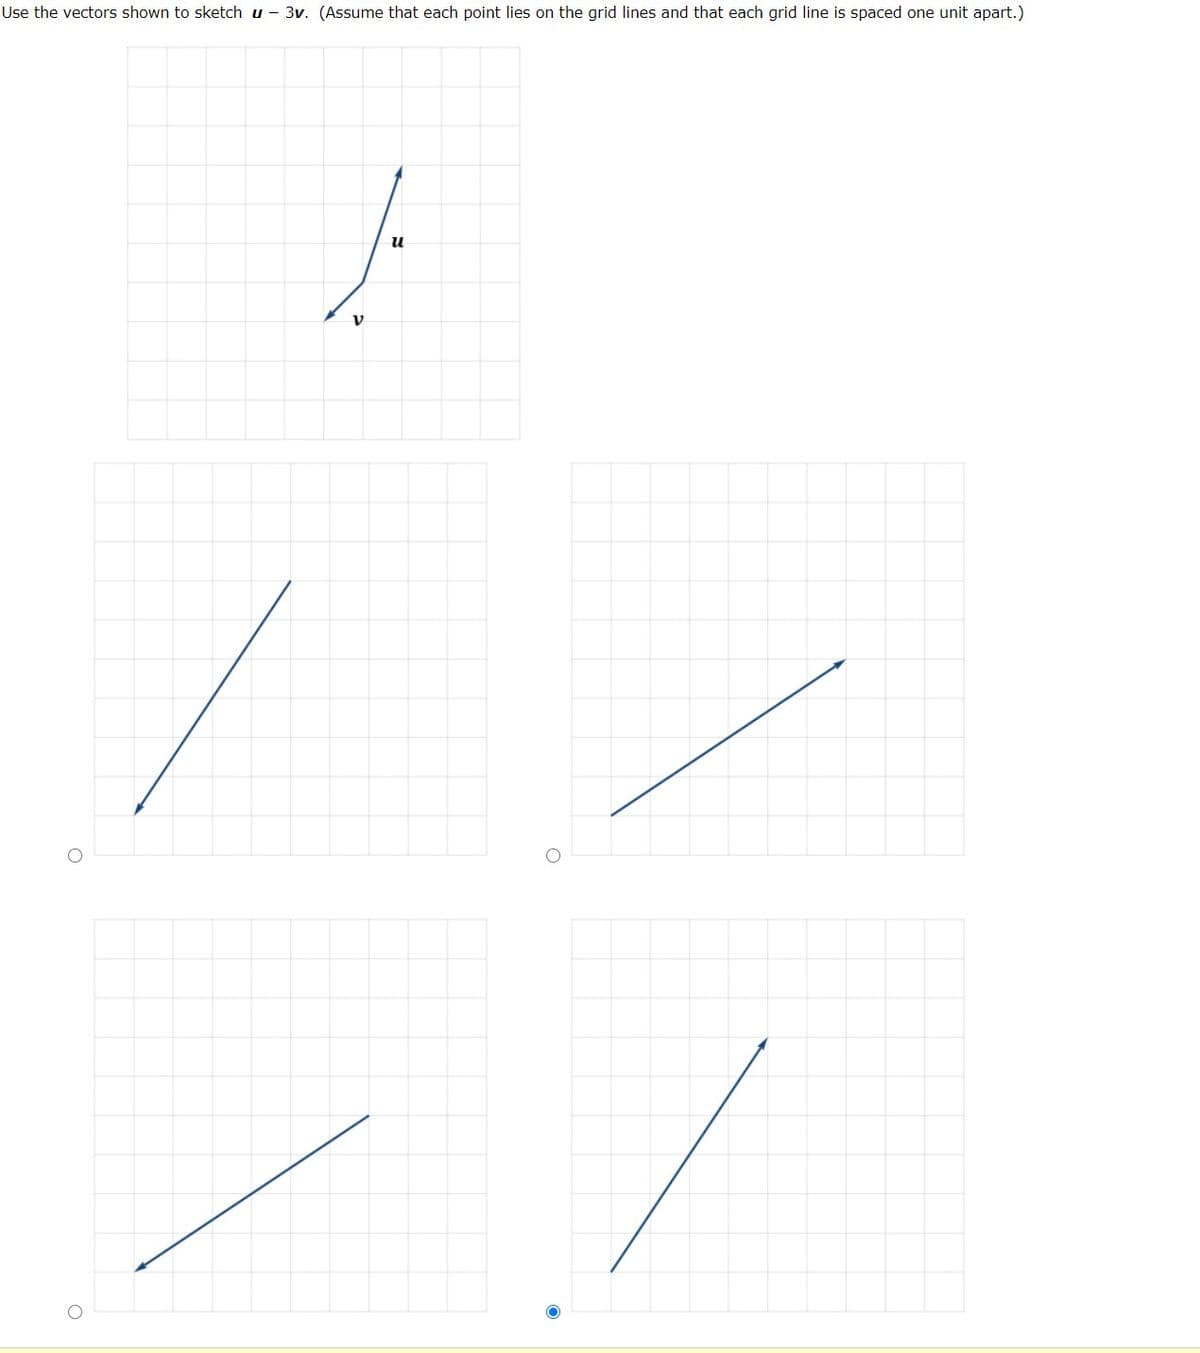 Use the vectors shown to sketch u - 3v. (Assume that each point lies on the grid lines and that each grid line is spaced one unit apart.)
u
